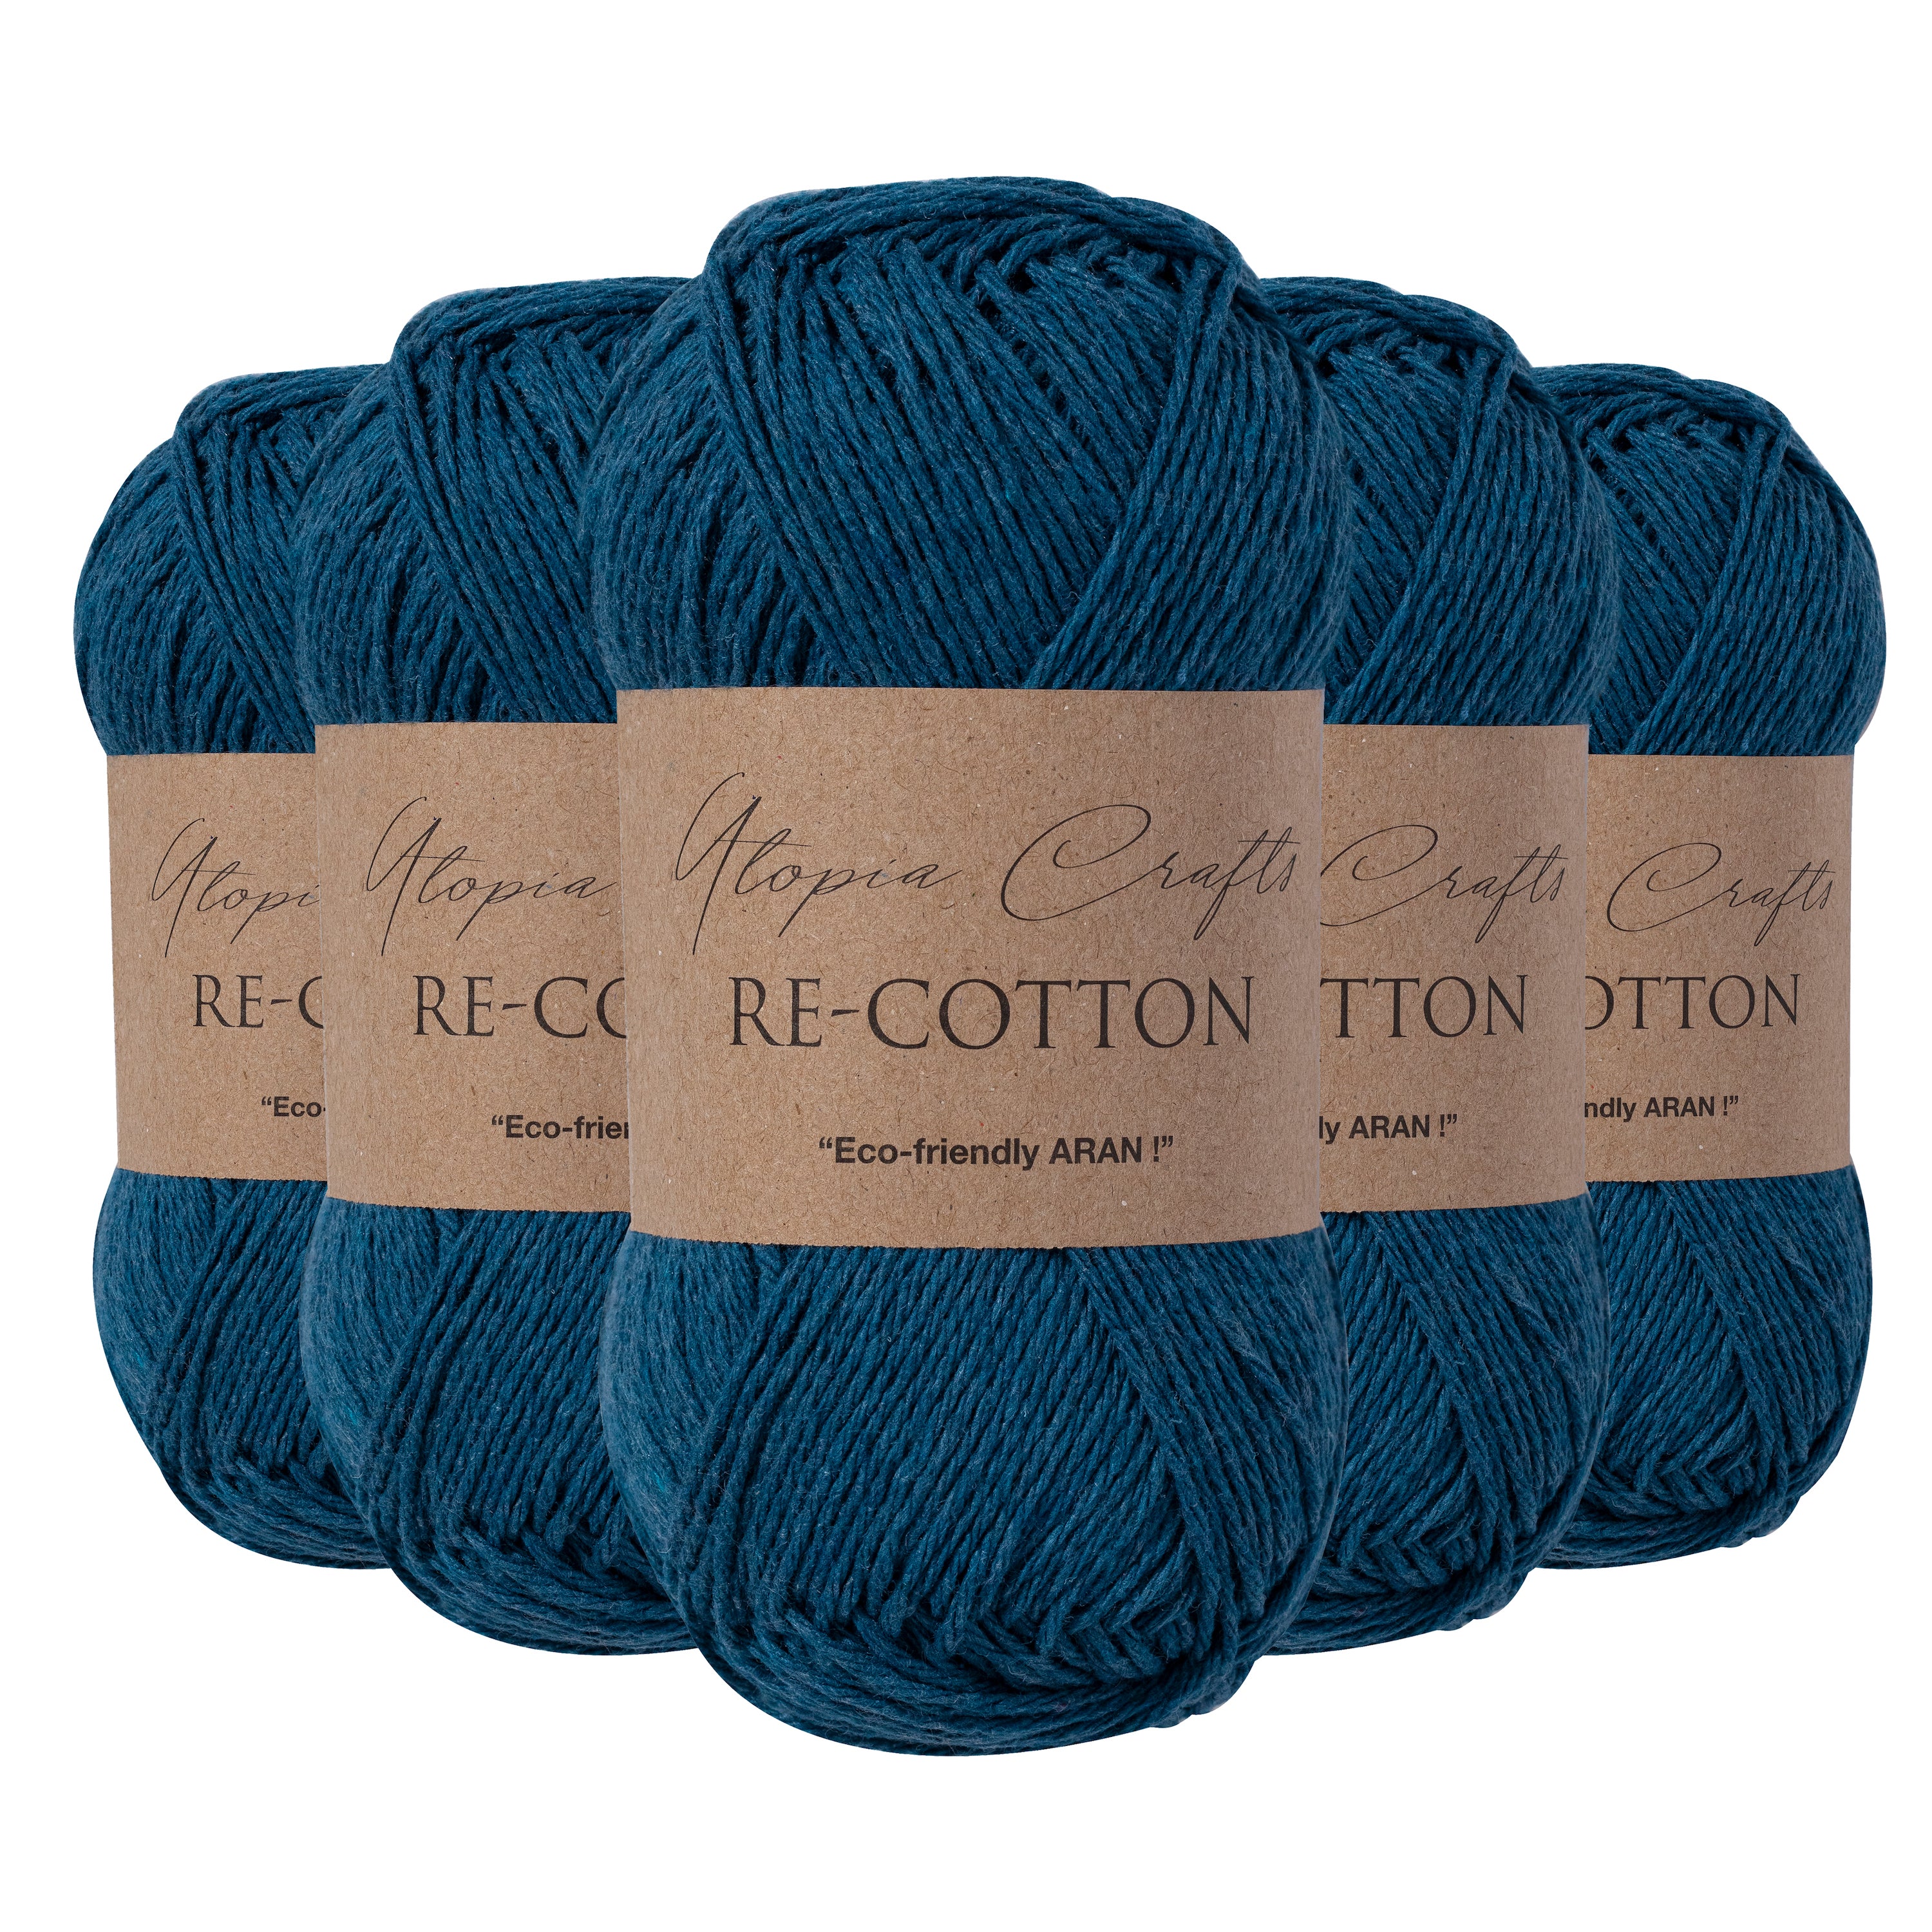 Utopia Crafts Re-Cotton Knitting Yarn, 5x 100g [Blue Whale]